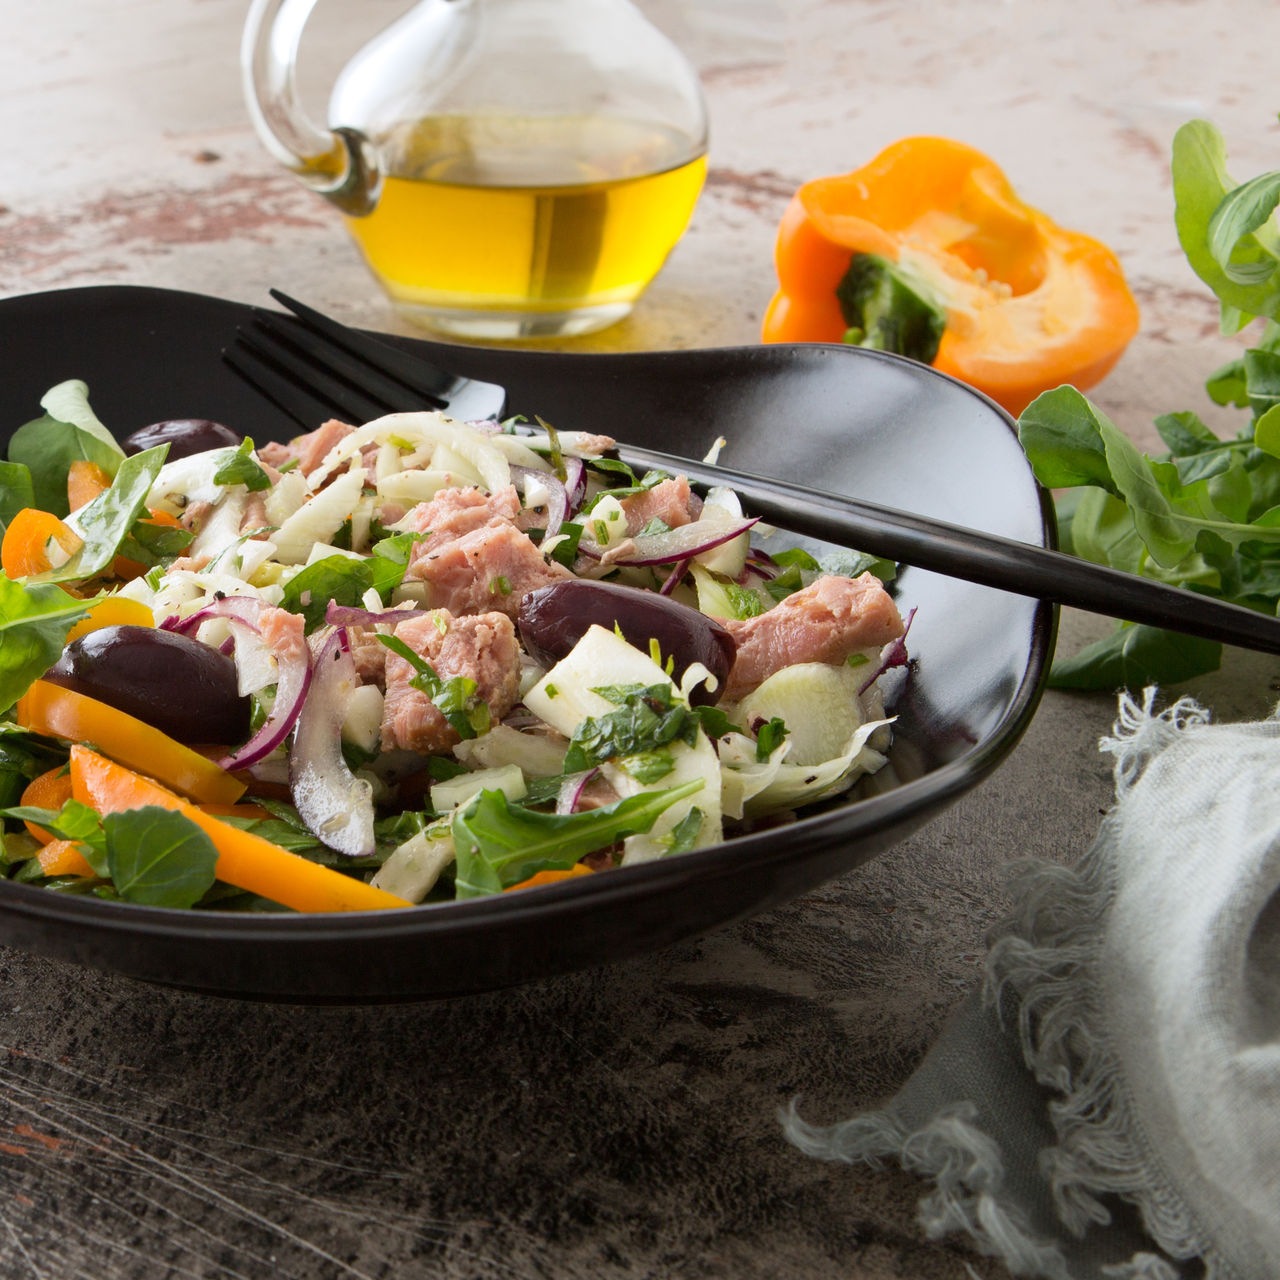 a plate of tuscan salad with tuna, fennel, peppers and olives on the table,a plate of tuscan salad with tuna, fennel, peppers and olives on